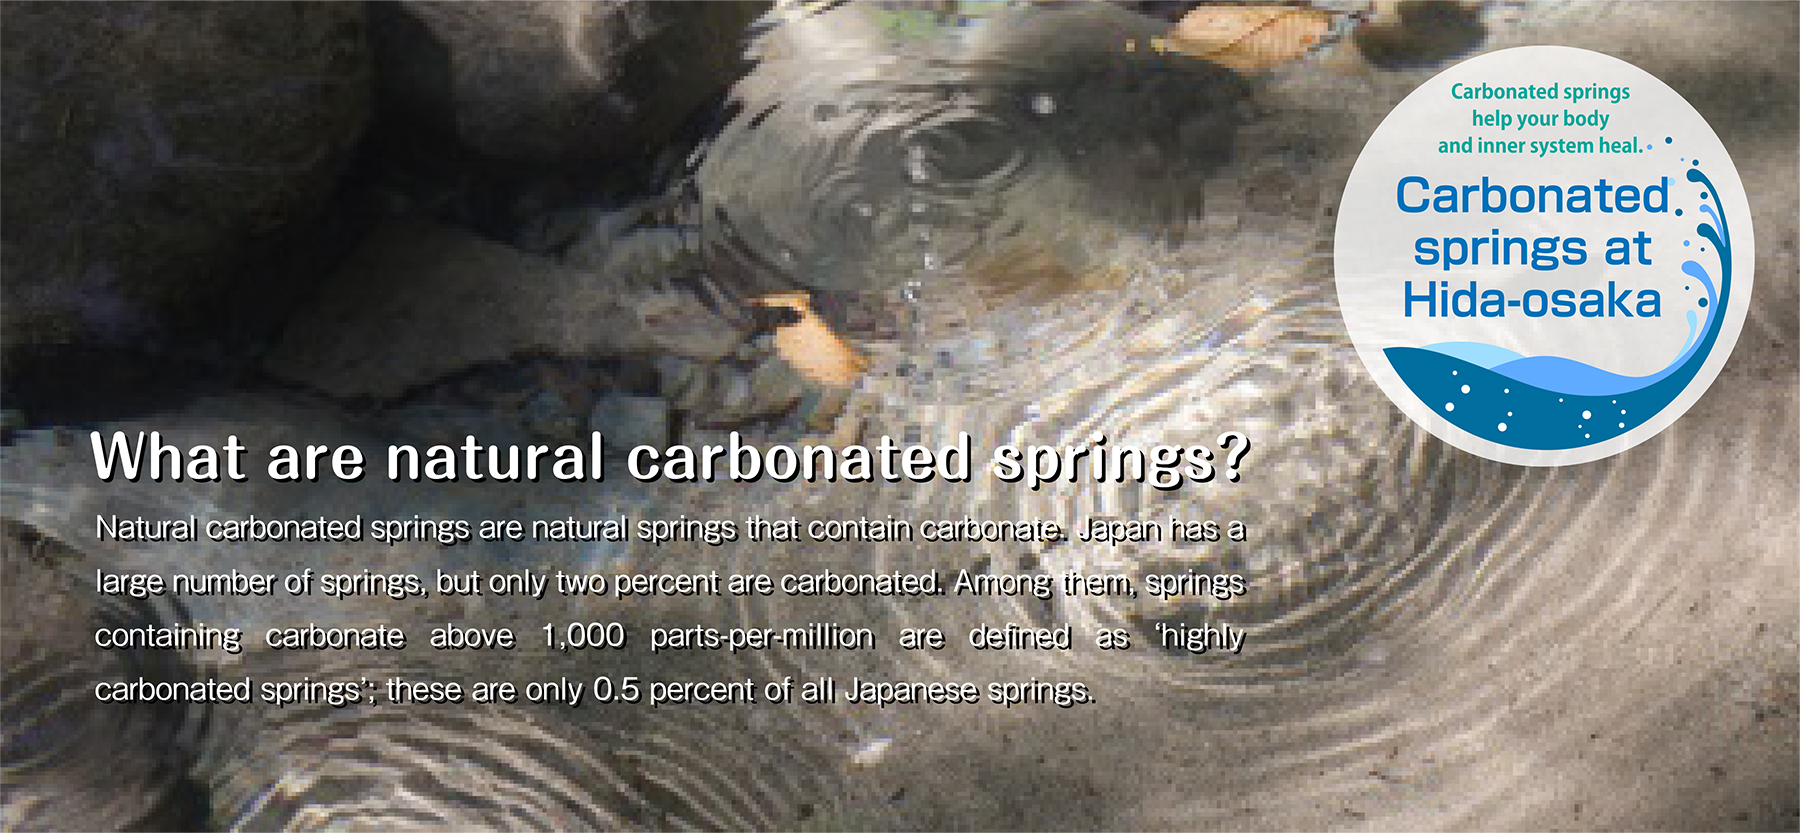 What are natural carbonated springs?